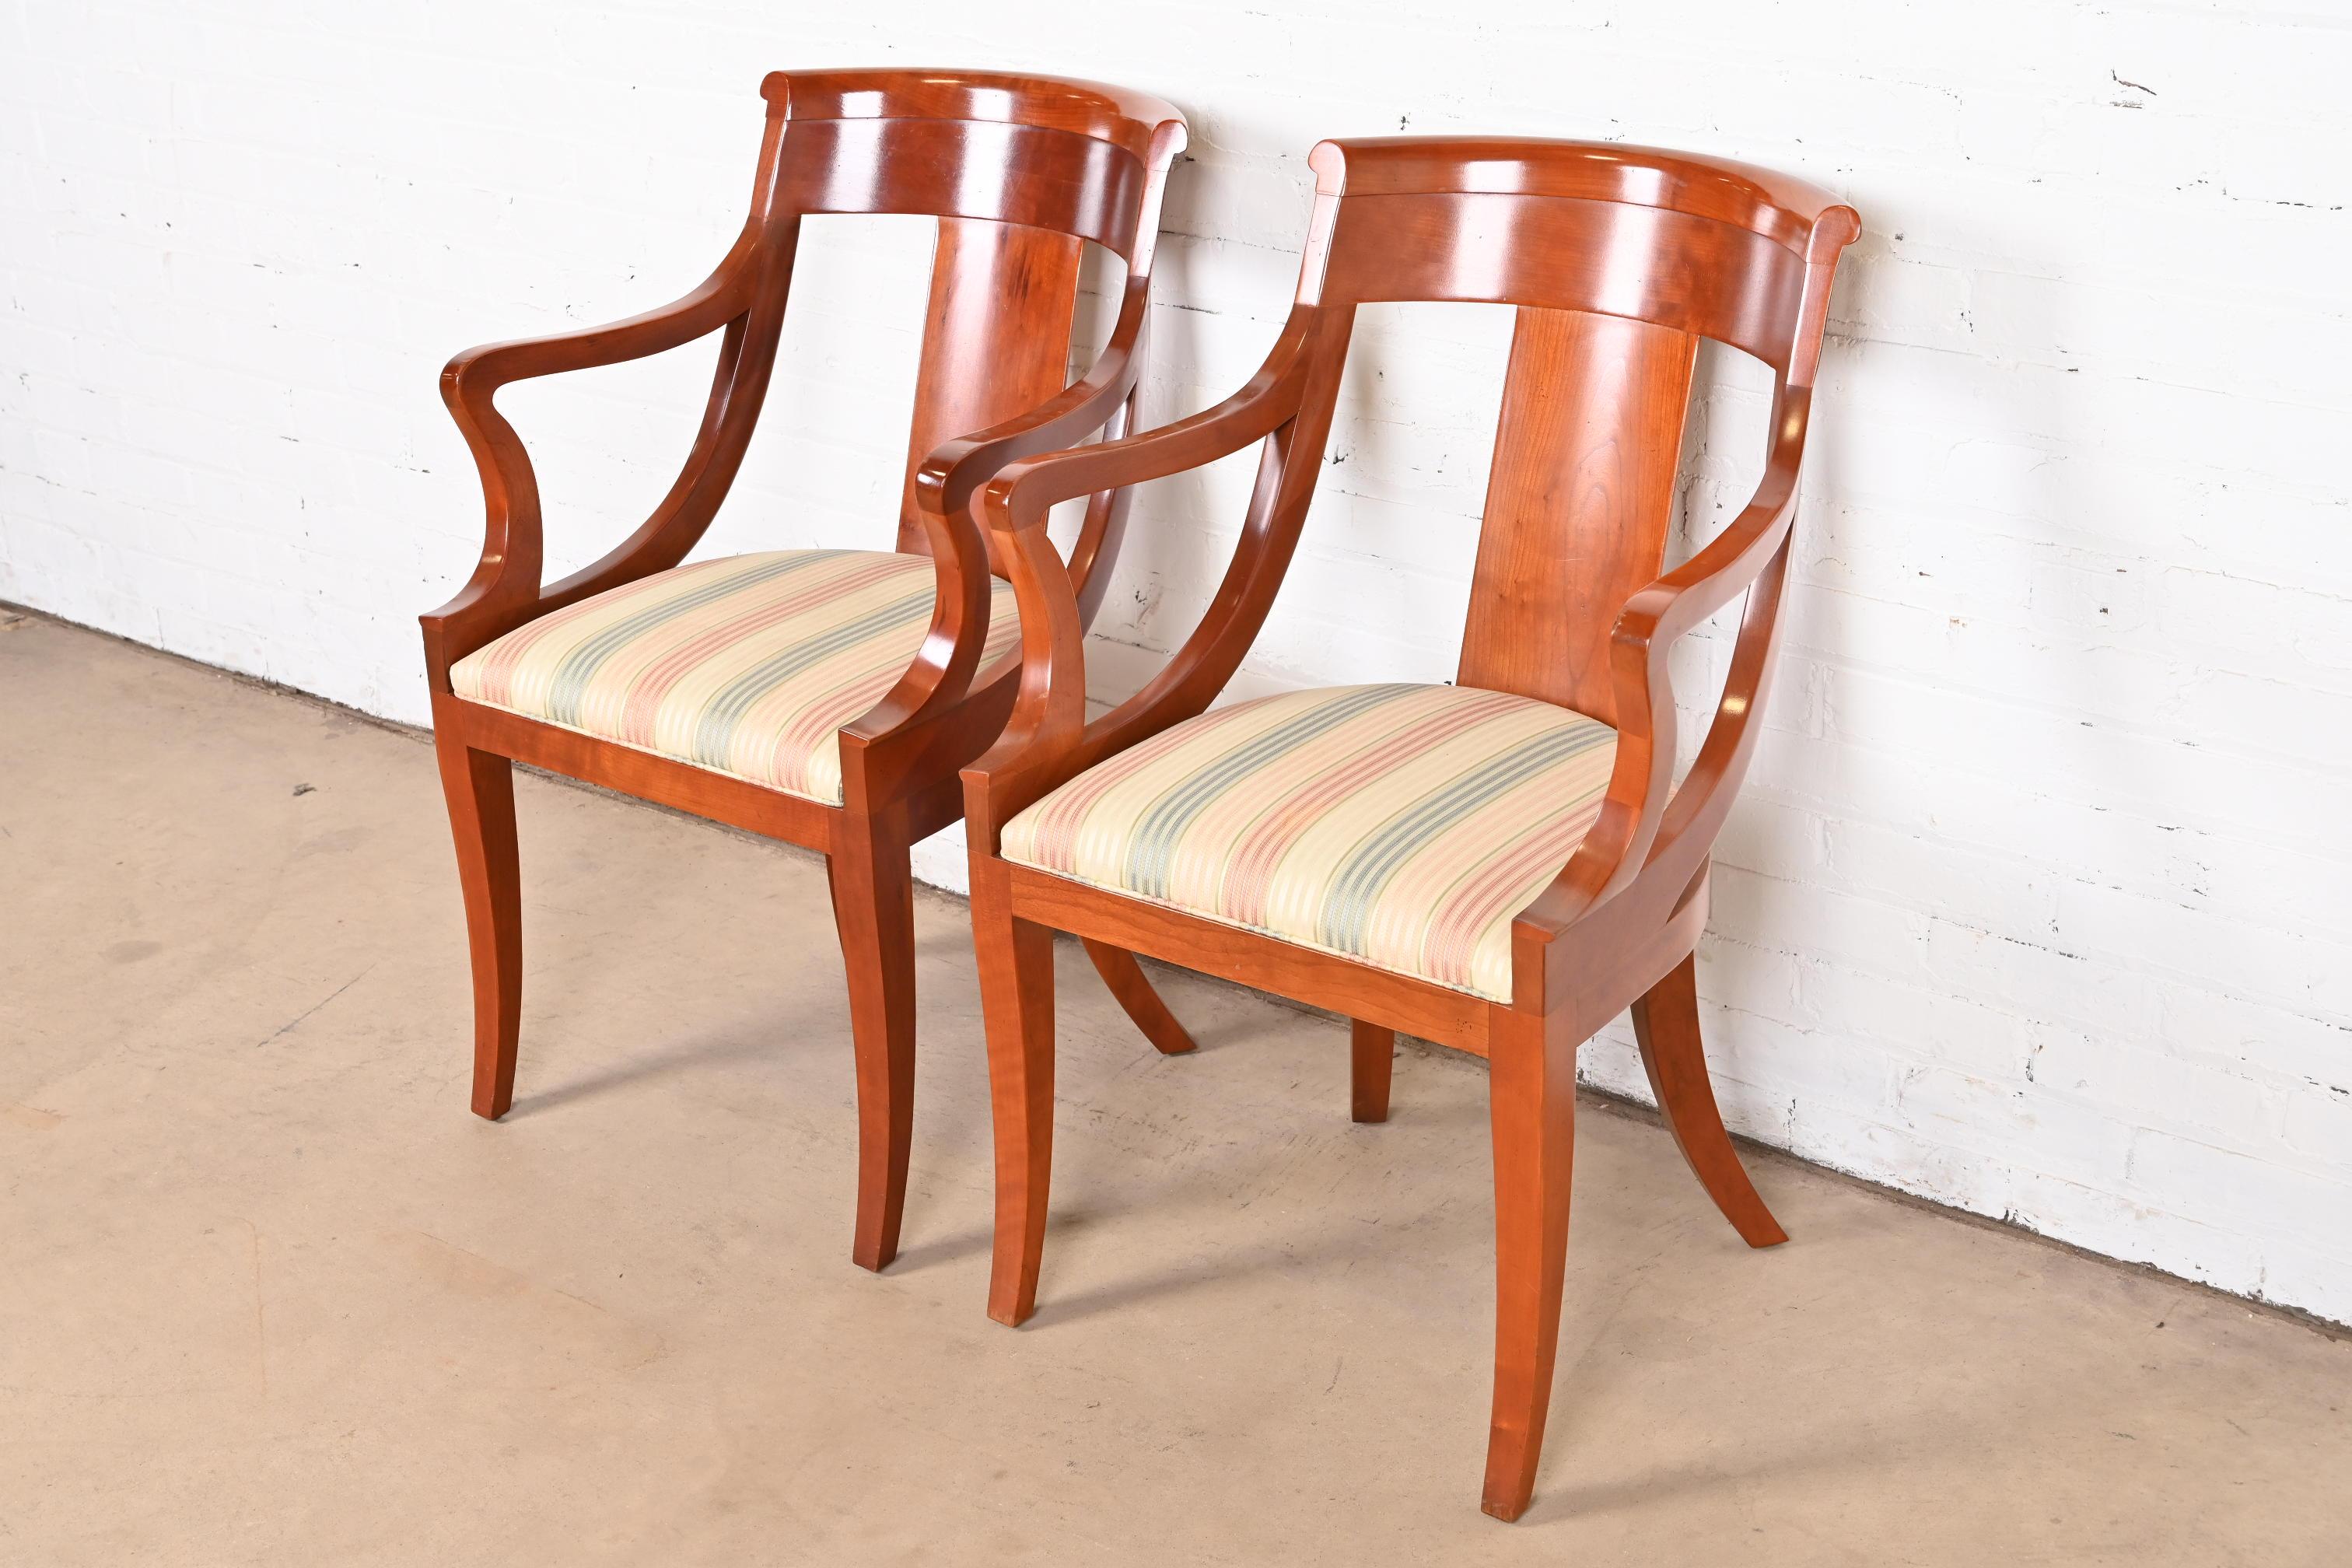 Upholstery Baker Furniture Solid Cherry Wood Regency Arm Chairs, Pair For Sale